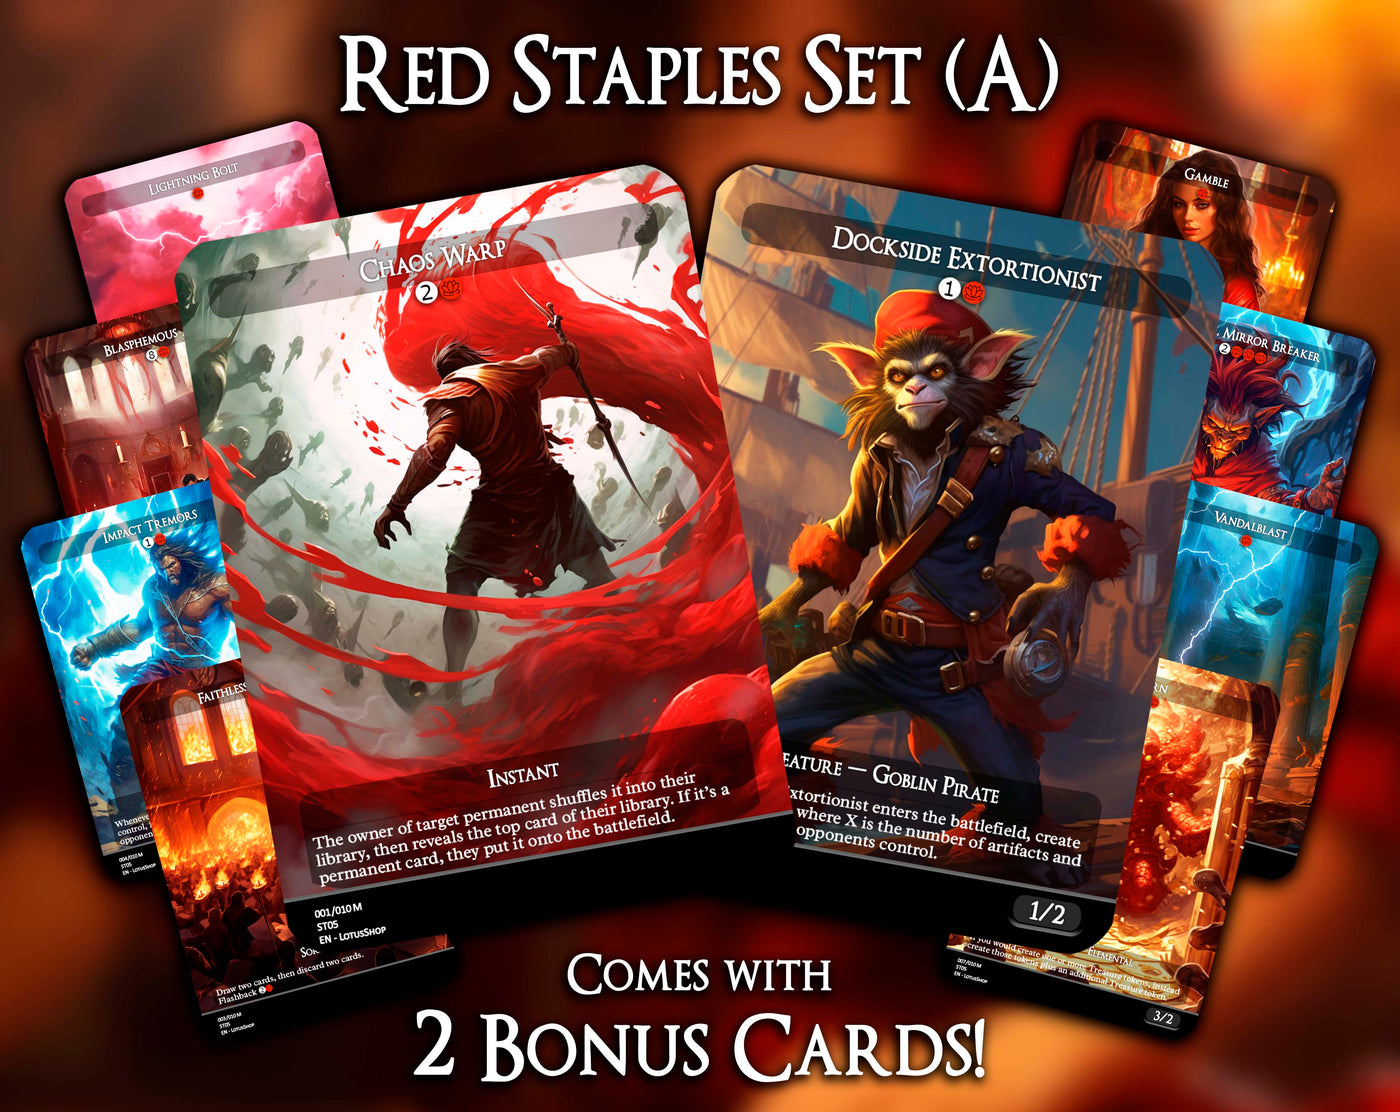 Red Staples Set (A)